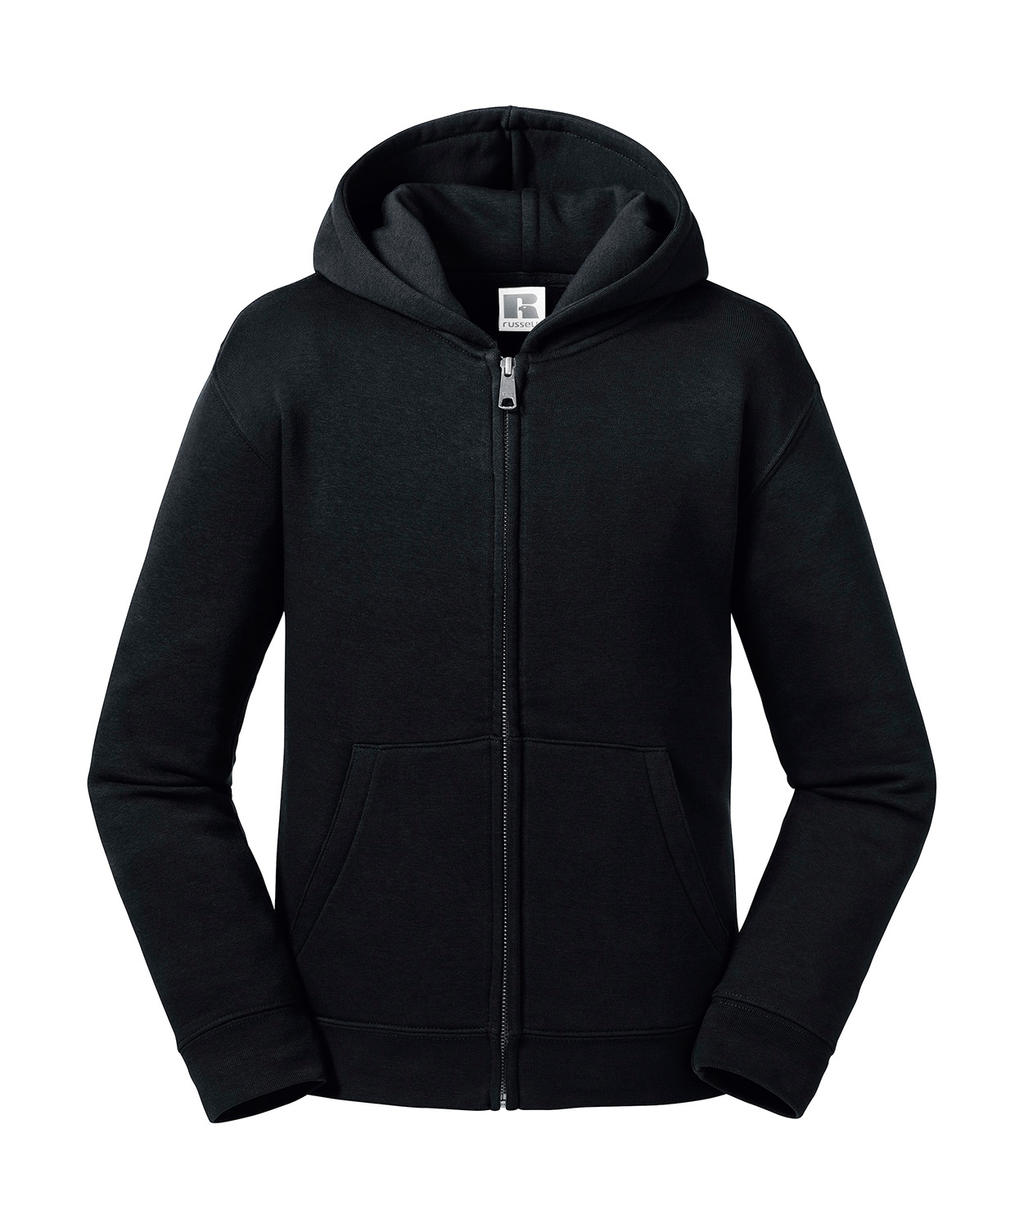  Kids Authentic Zipped Hood Sweat in Farbe Black